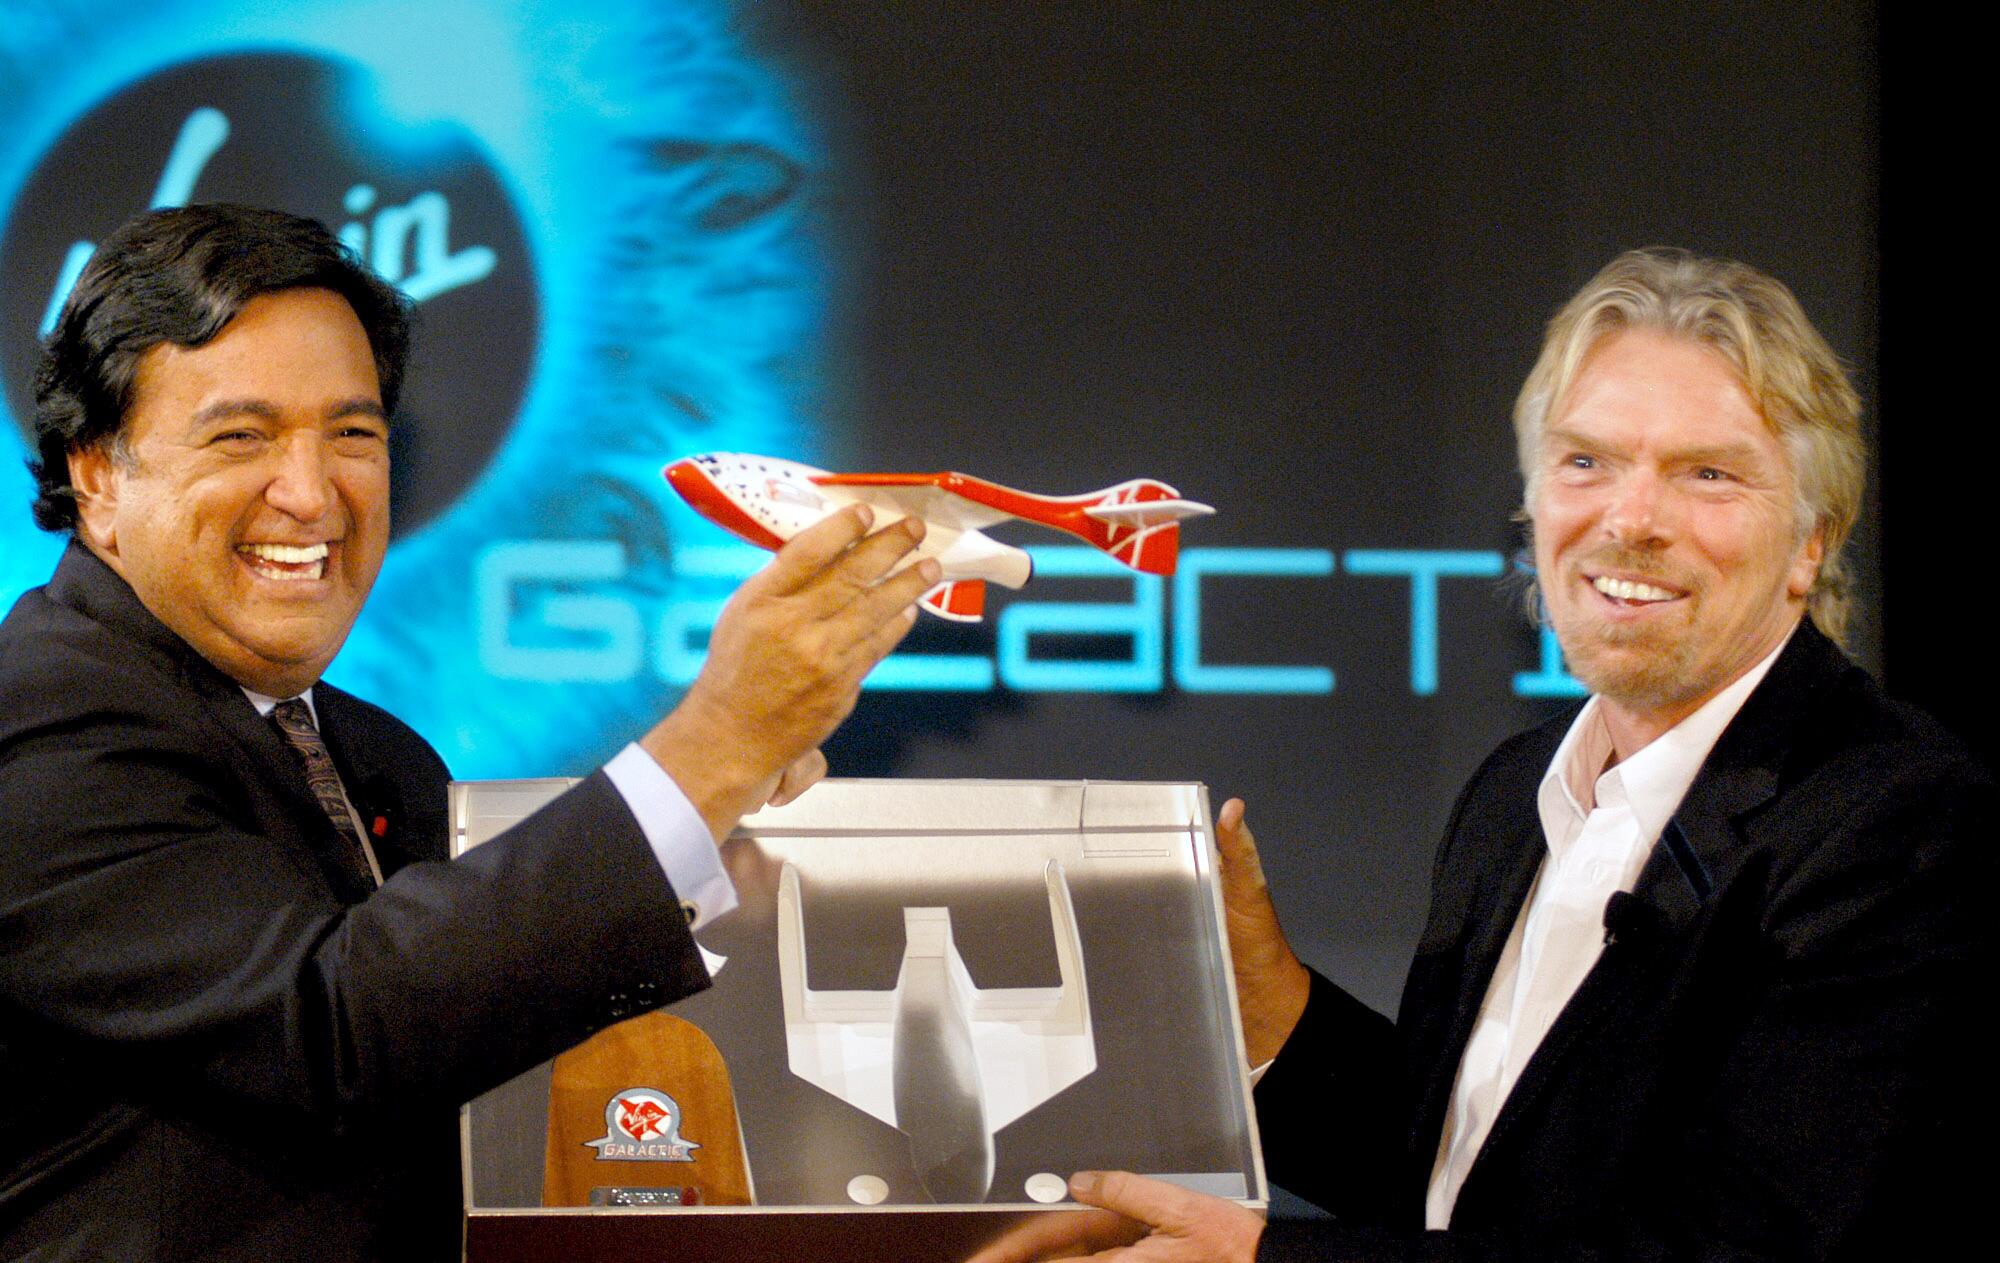 A smiling man with dark hair, left, holds a model of a spaceship next to a bearded man, also smiling, holding a display 